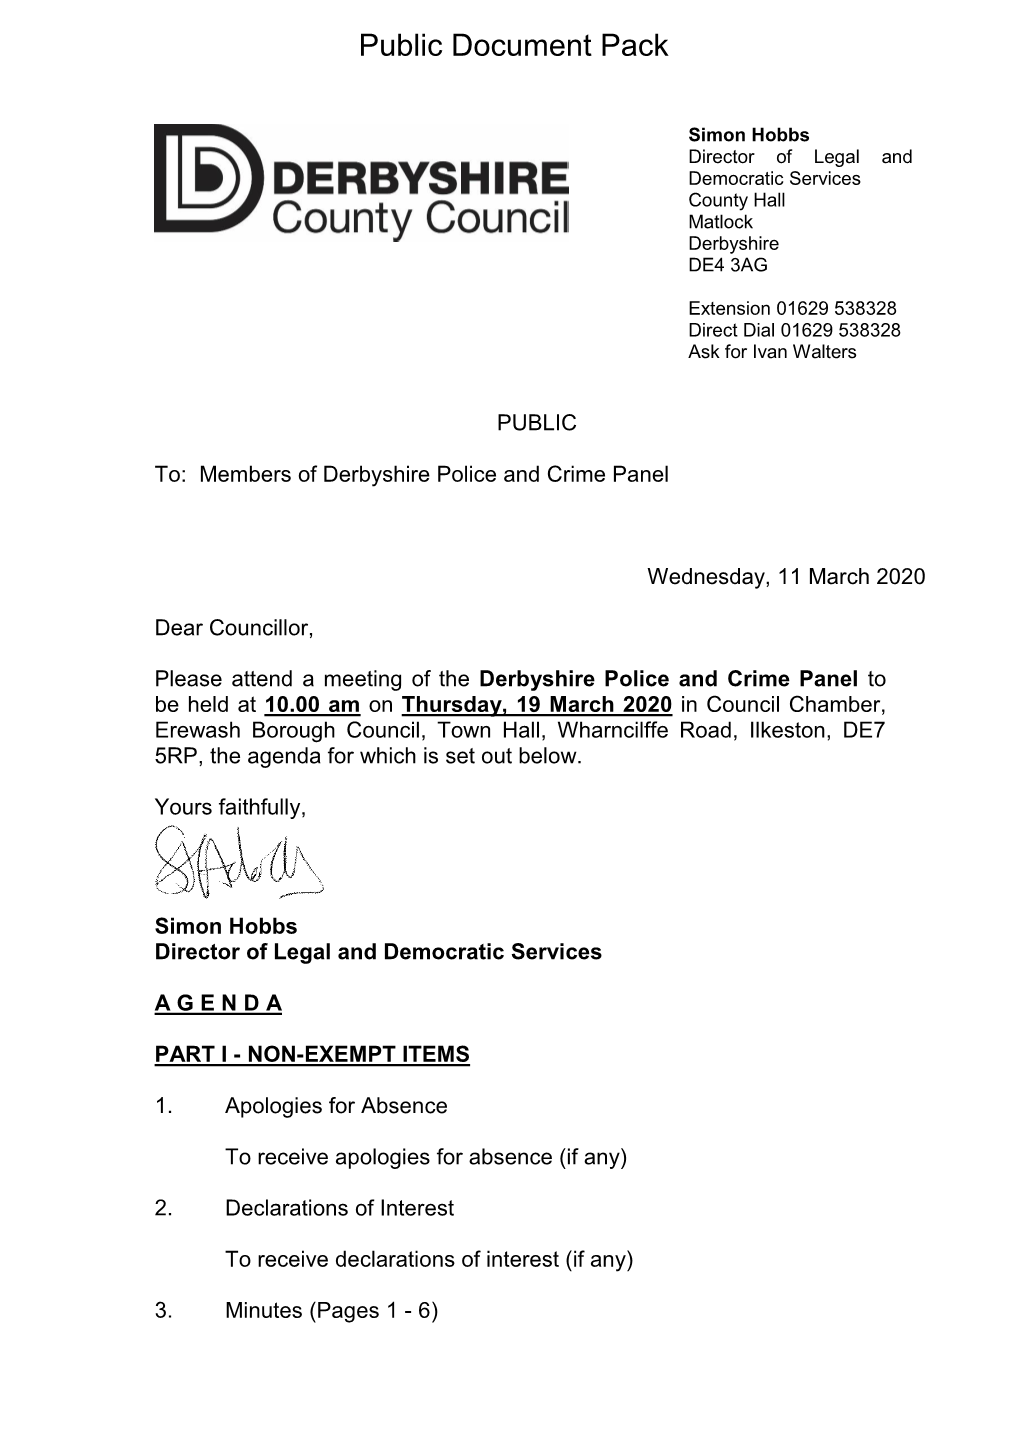 (Public Pack)Agenda Document for Derbyshire Police and Crime Panel